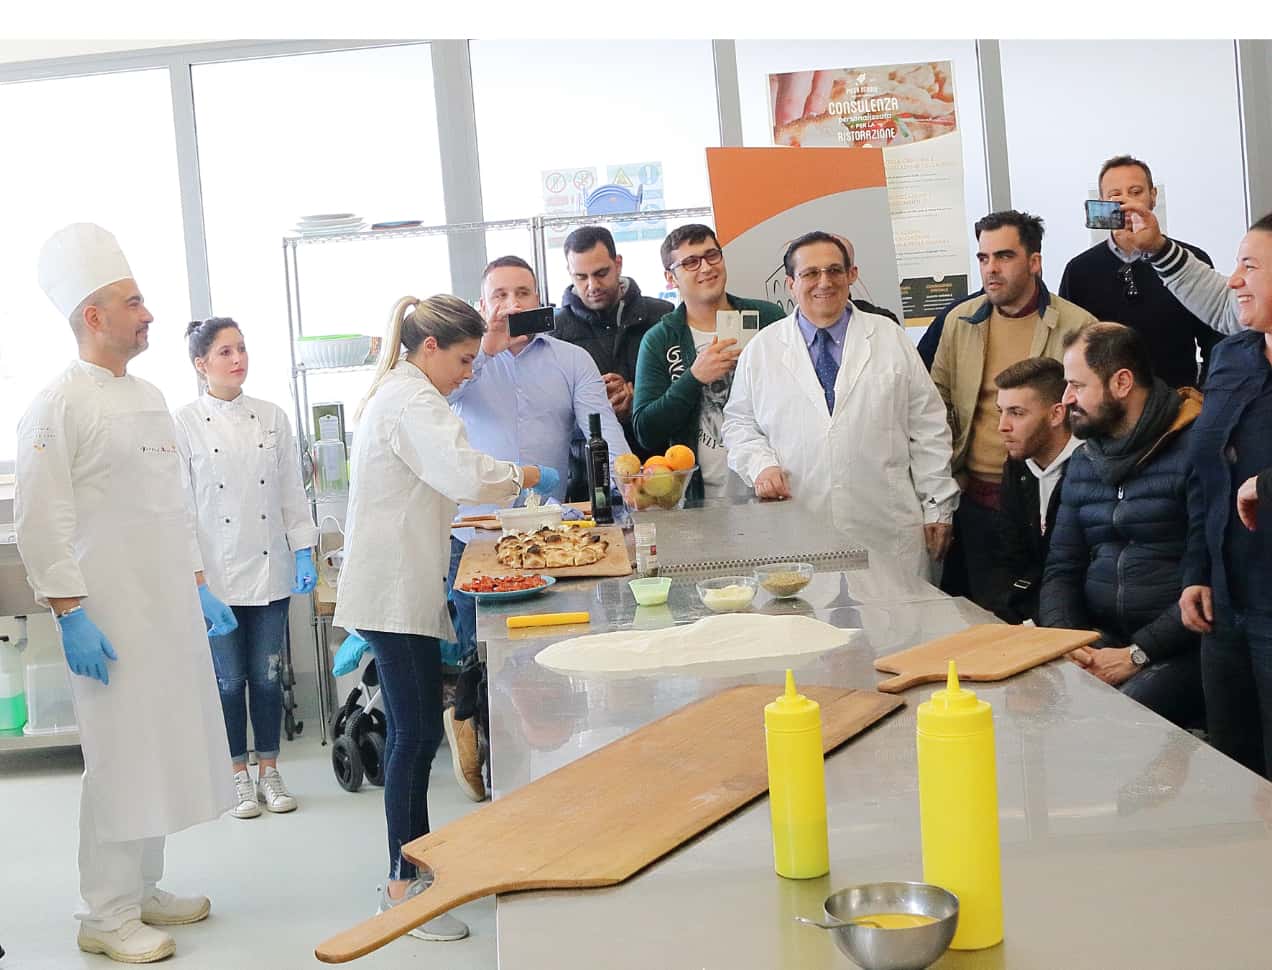 Photo of Corrado Di Marco together with two chefs and spectators at a Pinsa Romana demonstration